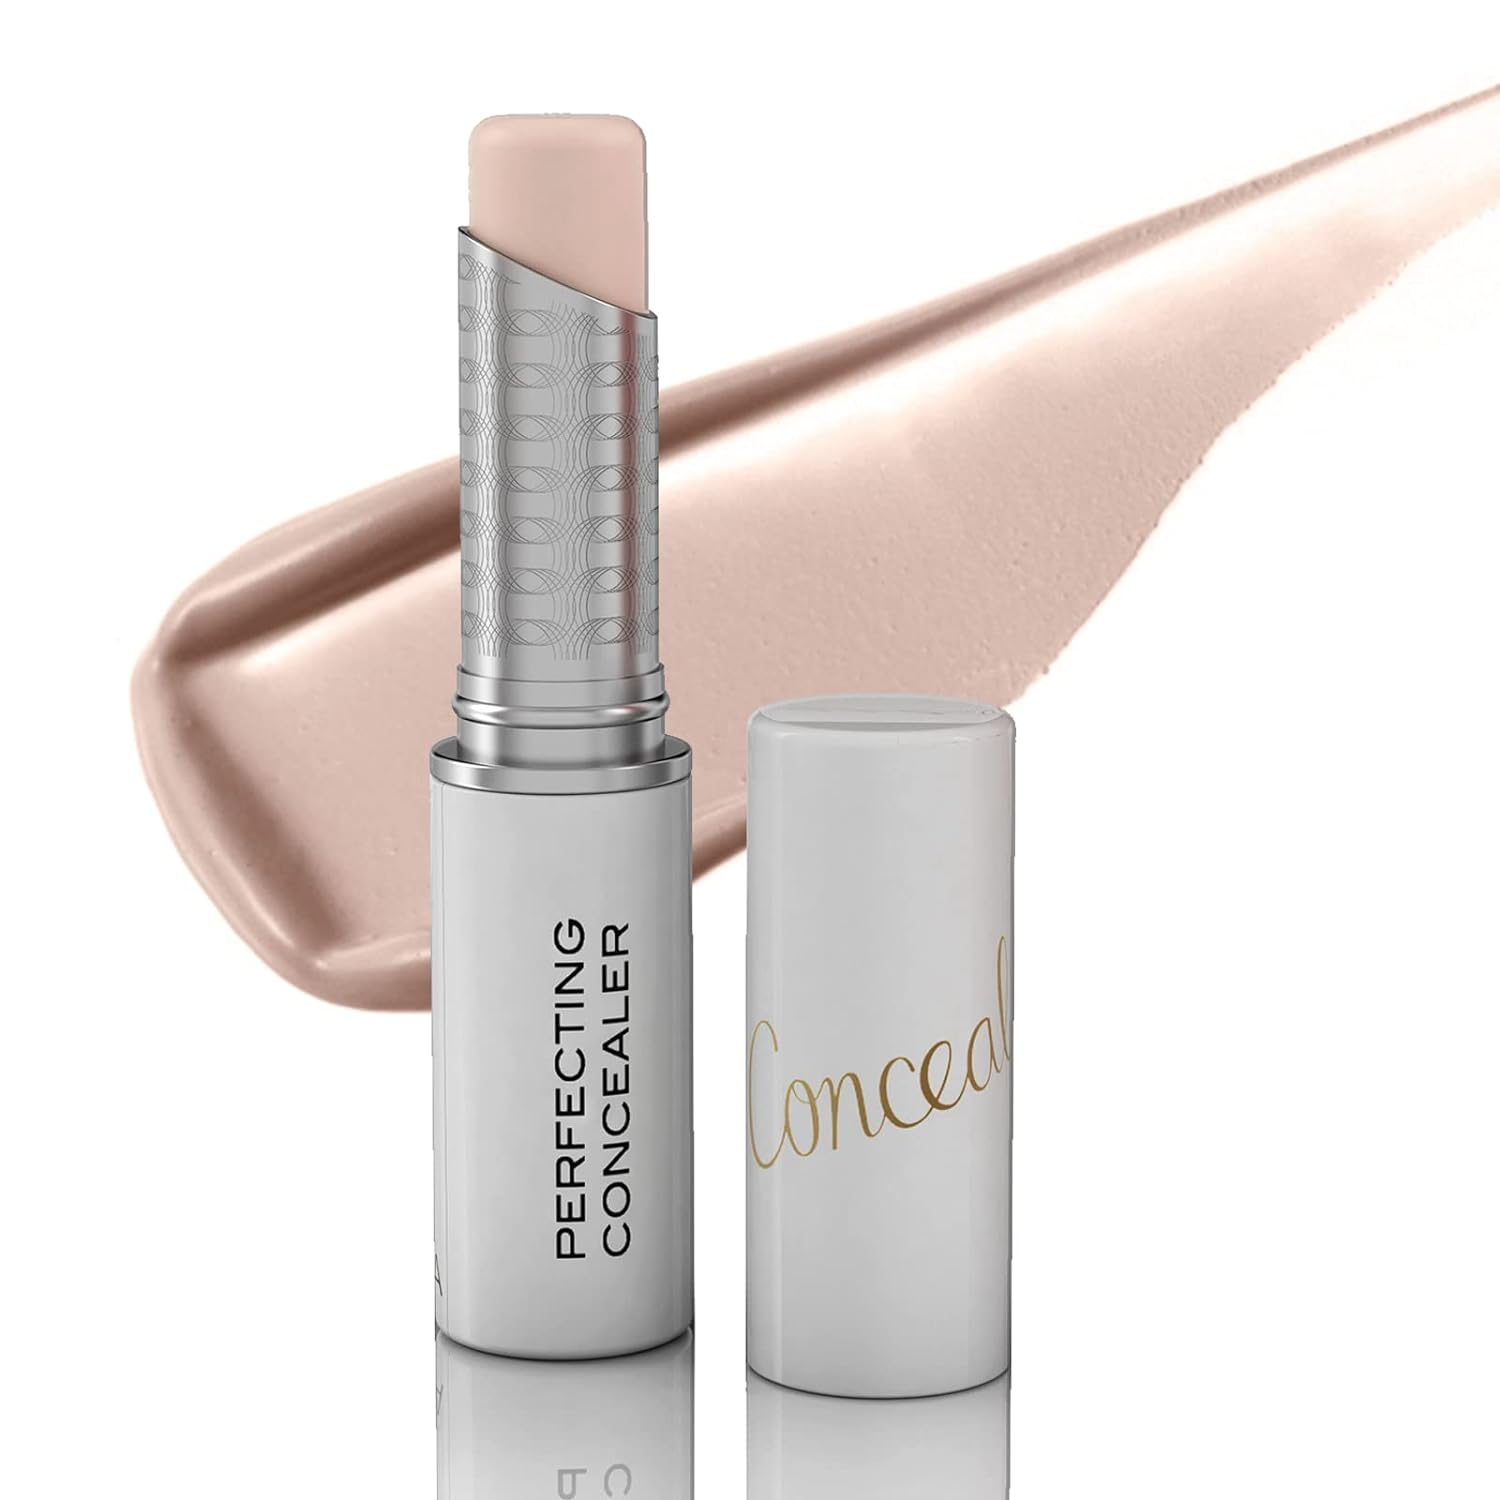 Mirabella Perfecting Long-Wear Cream Concealer Stick, Shade Fair Weightless & Versatile Formula Soothes, Nourishes & Moisturizes Skin While Hiding Fine Lines & Wrinkles - Paraben-Free & Cruelty-Free